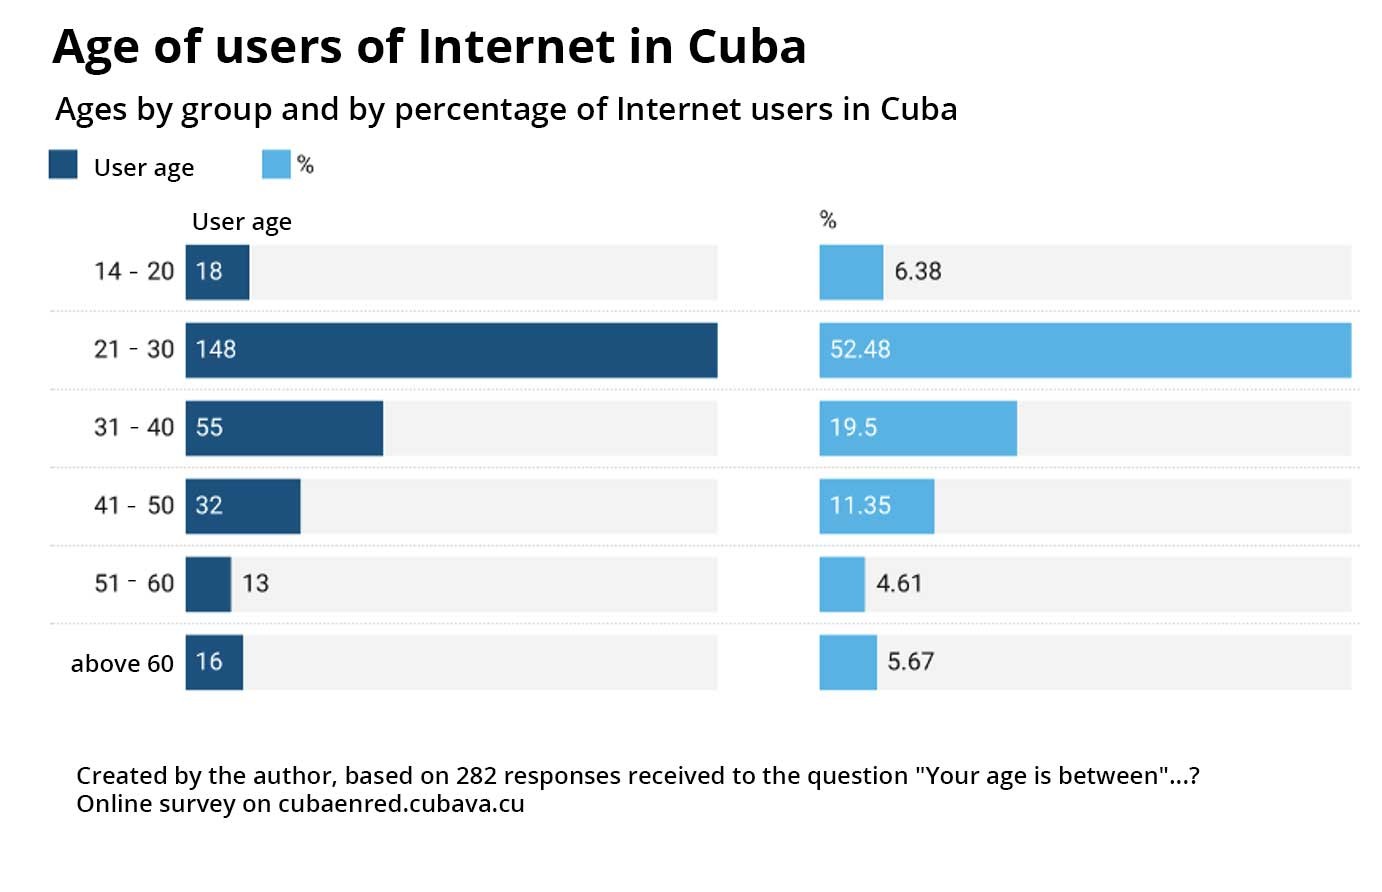 This image shows Internet users in Cuba by age group.